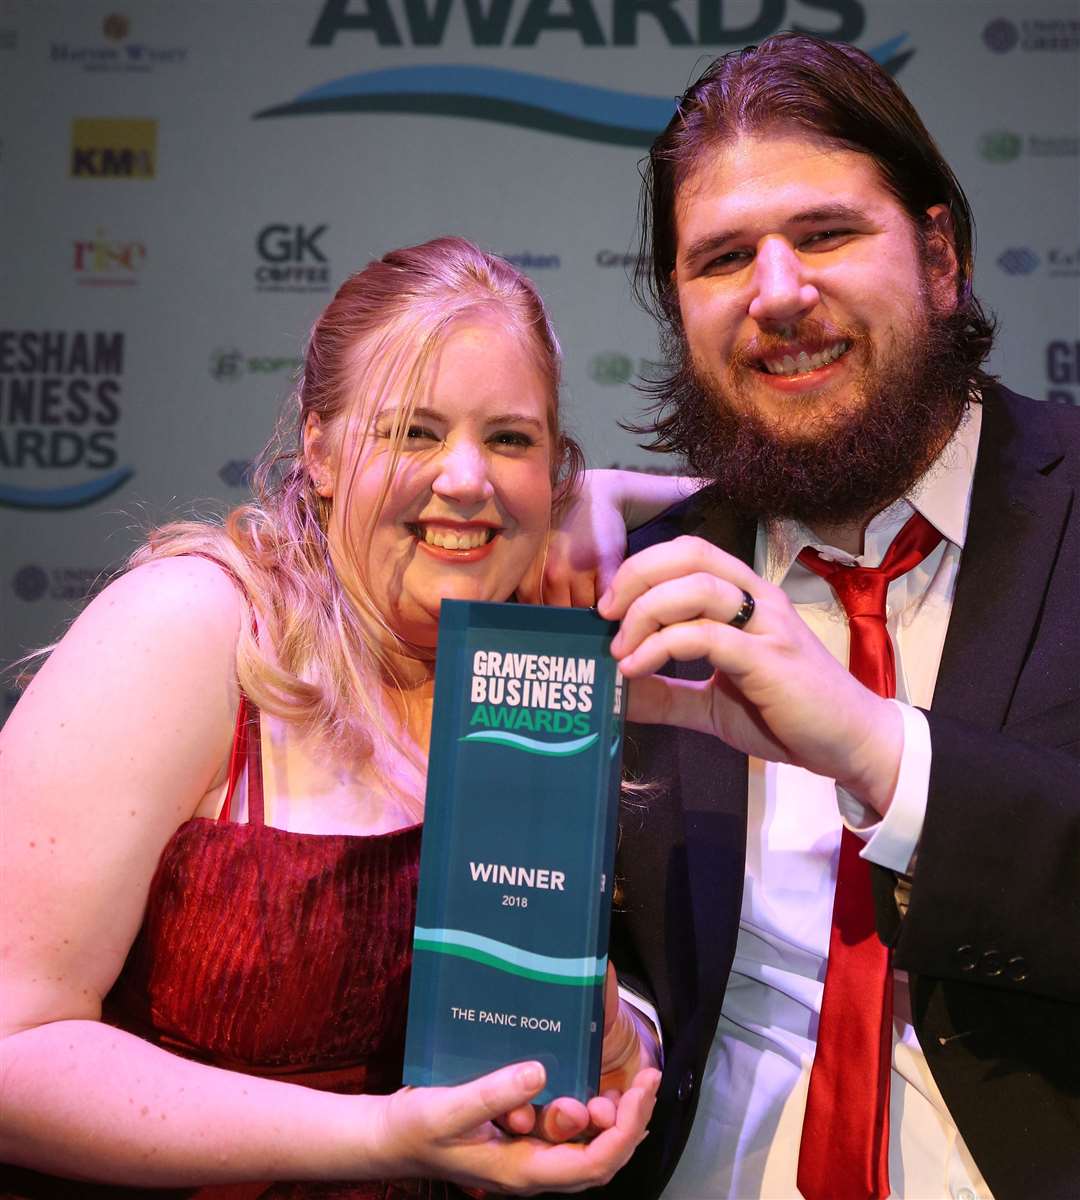 Winners of Gravesham Business of the Year 2018, the Panic Room. Alex & Monique Souter with the trophy. Picture: Roger Vaughan